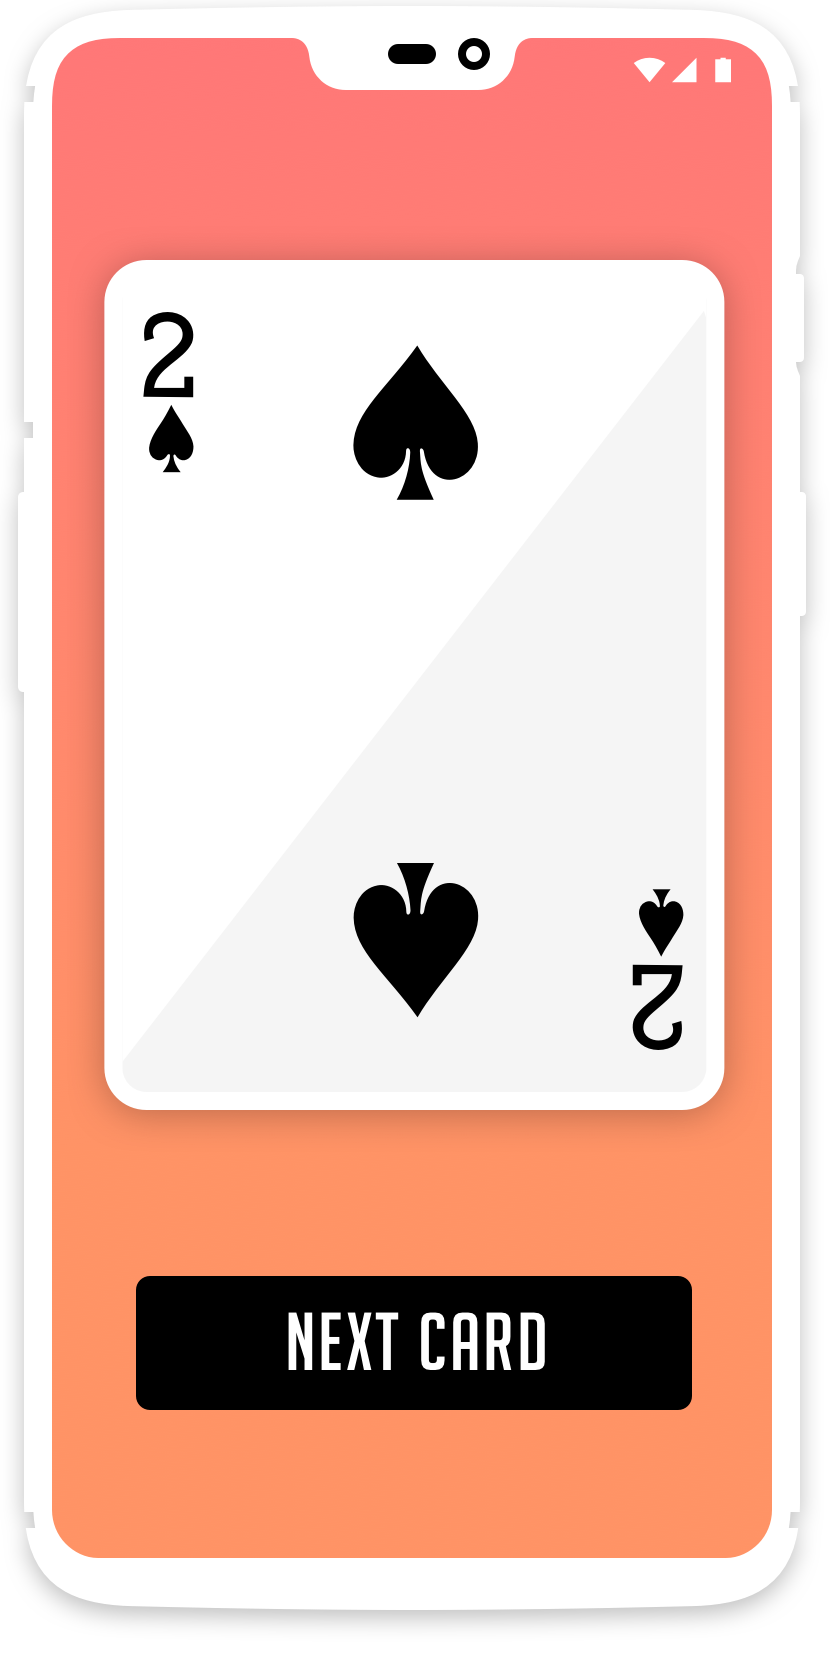 Mobile device with a playing card on screen